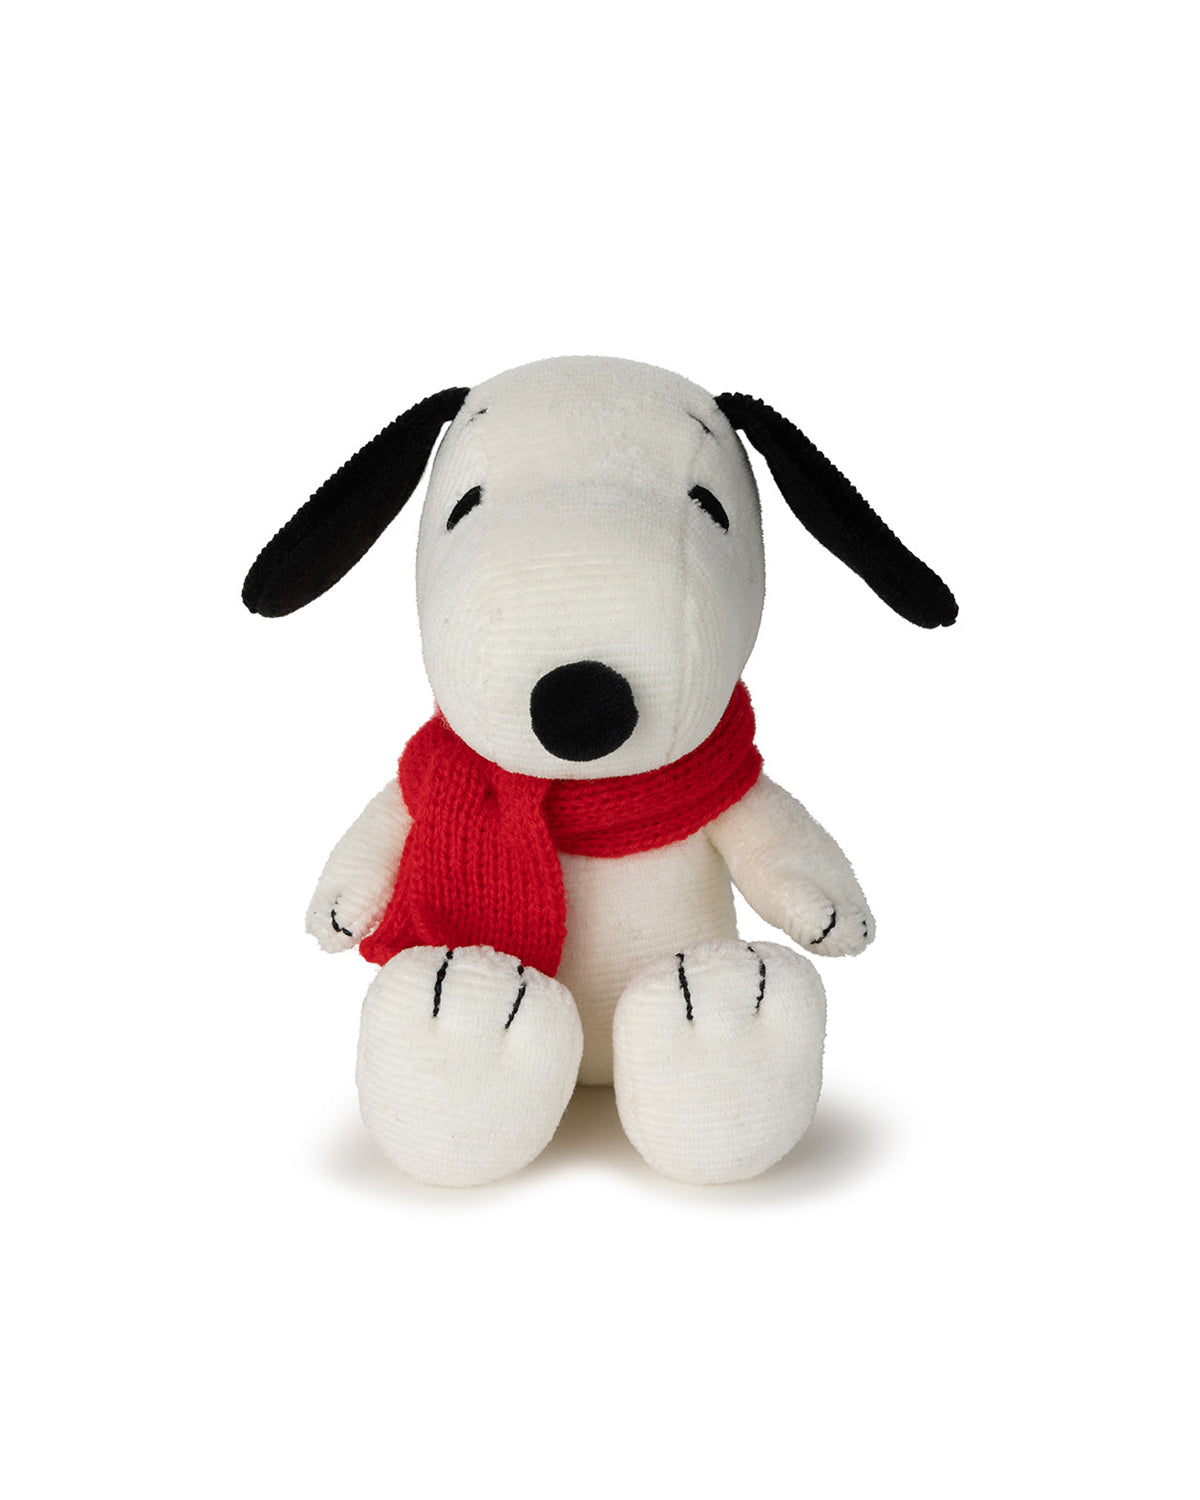 Plush PEANUTS SNOOPY Sitting 7" and 7.5"